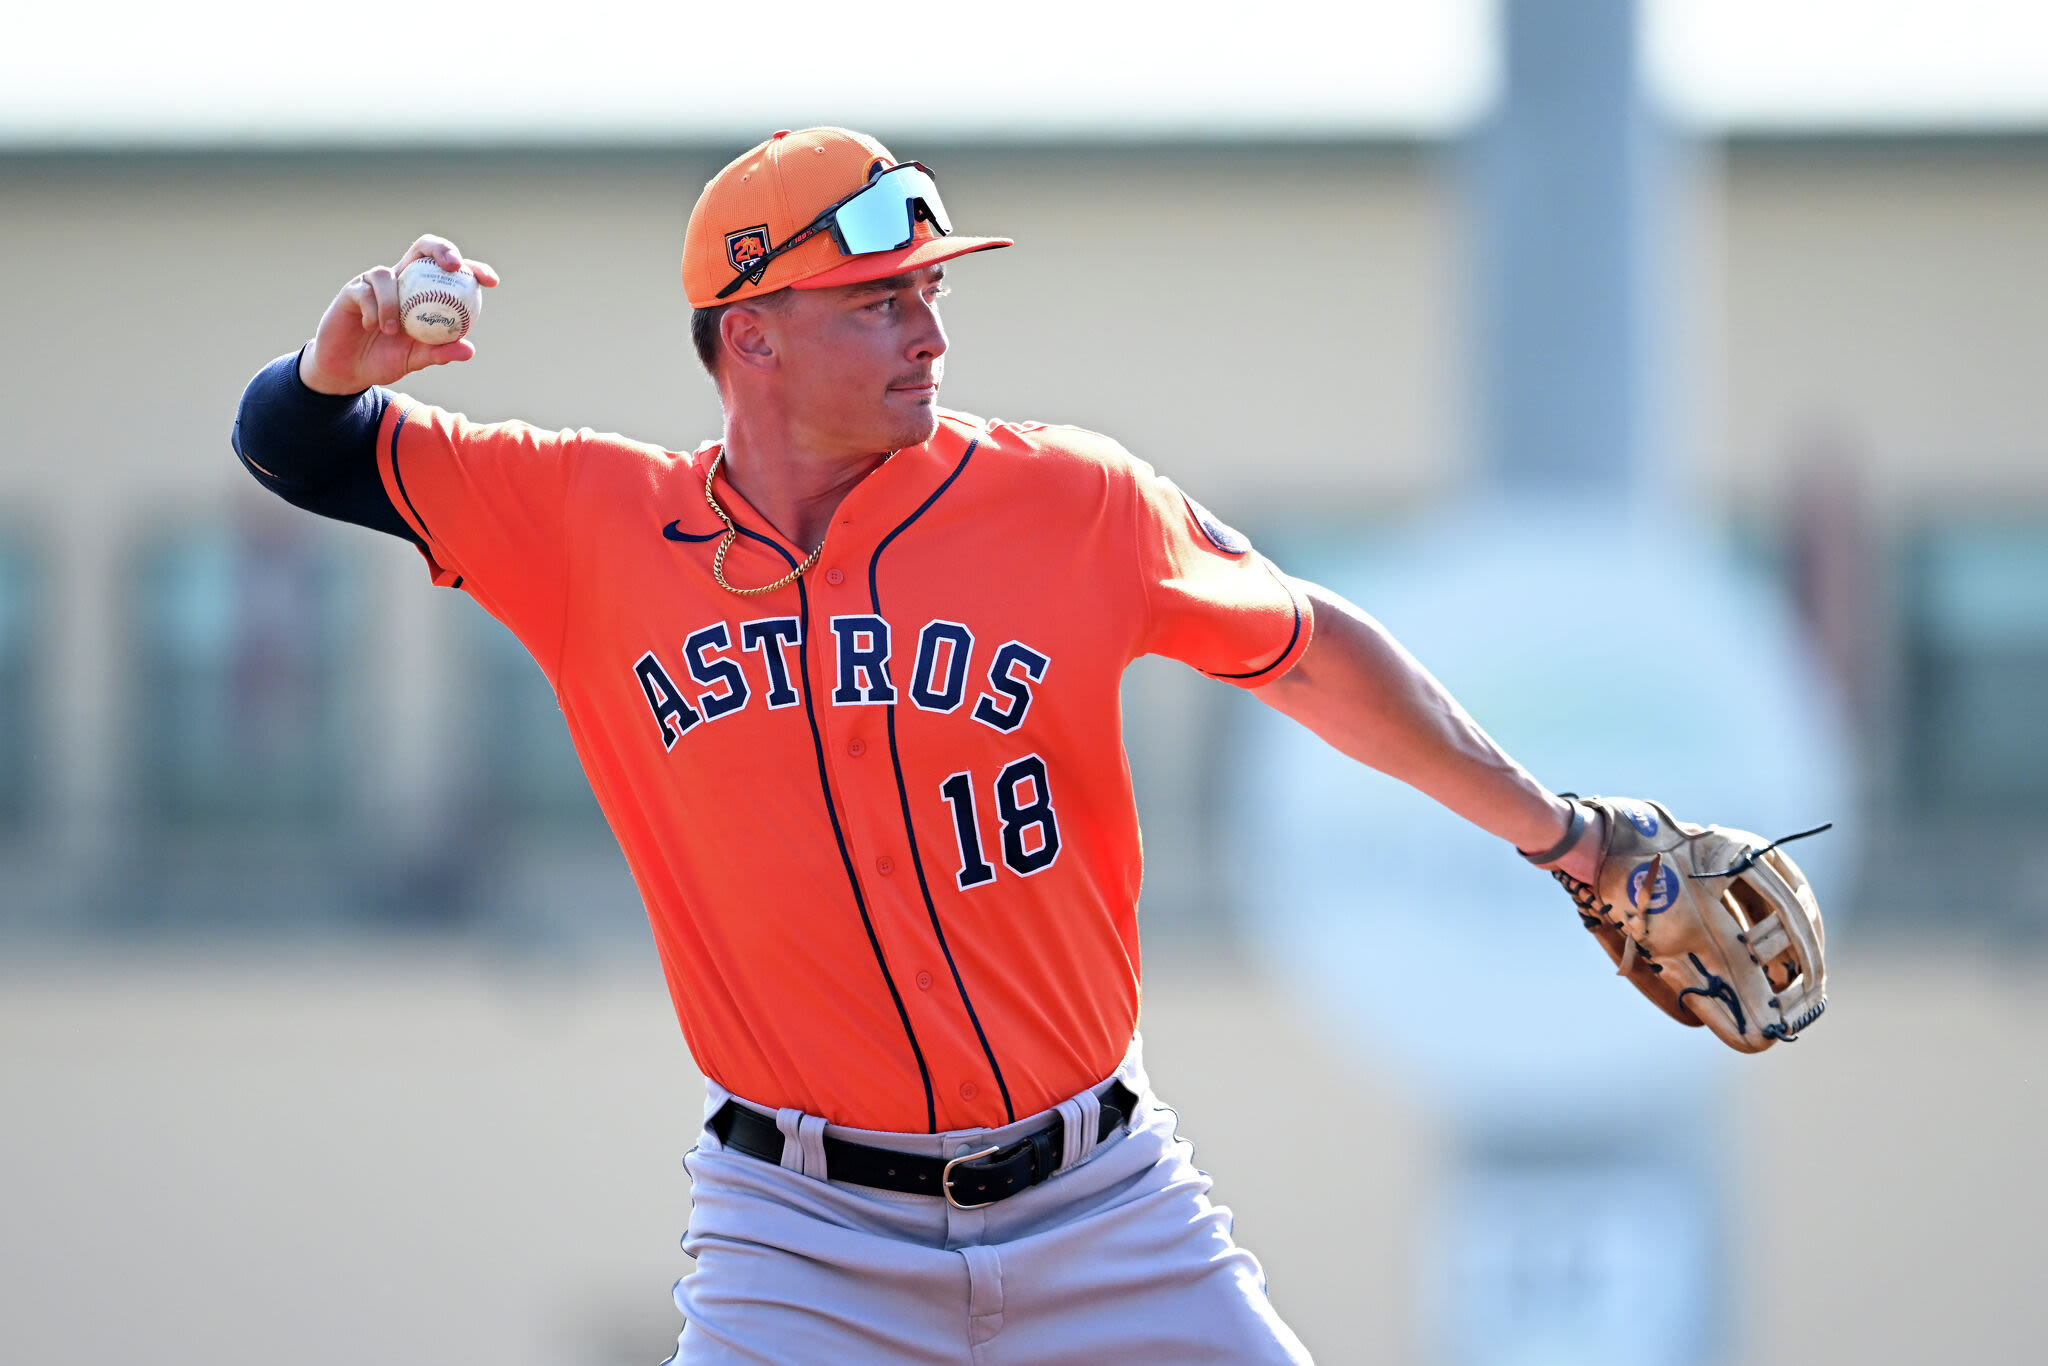 Astros' prized prospect continues rise through minors